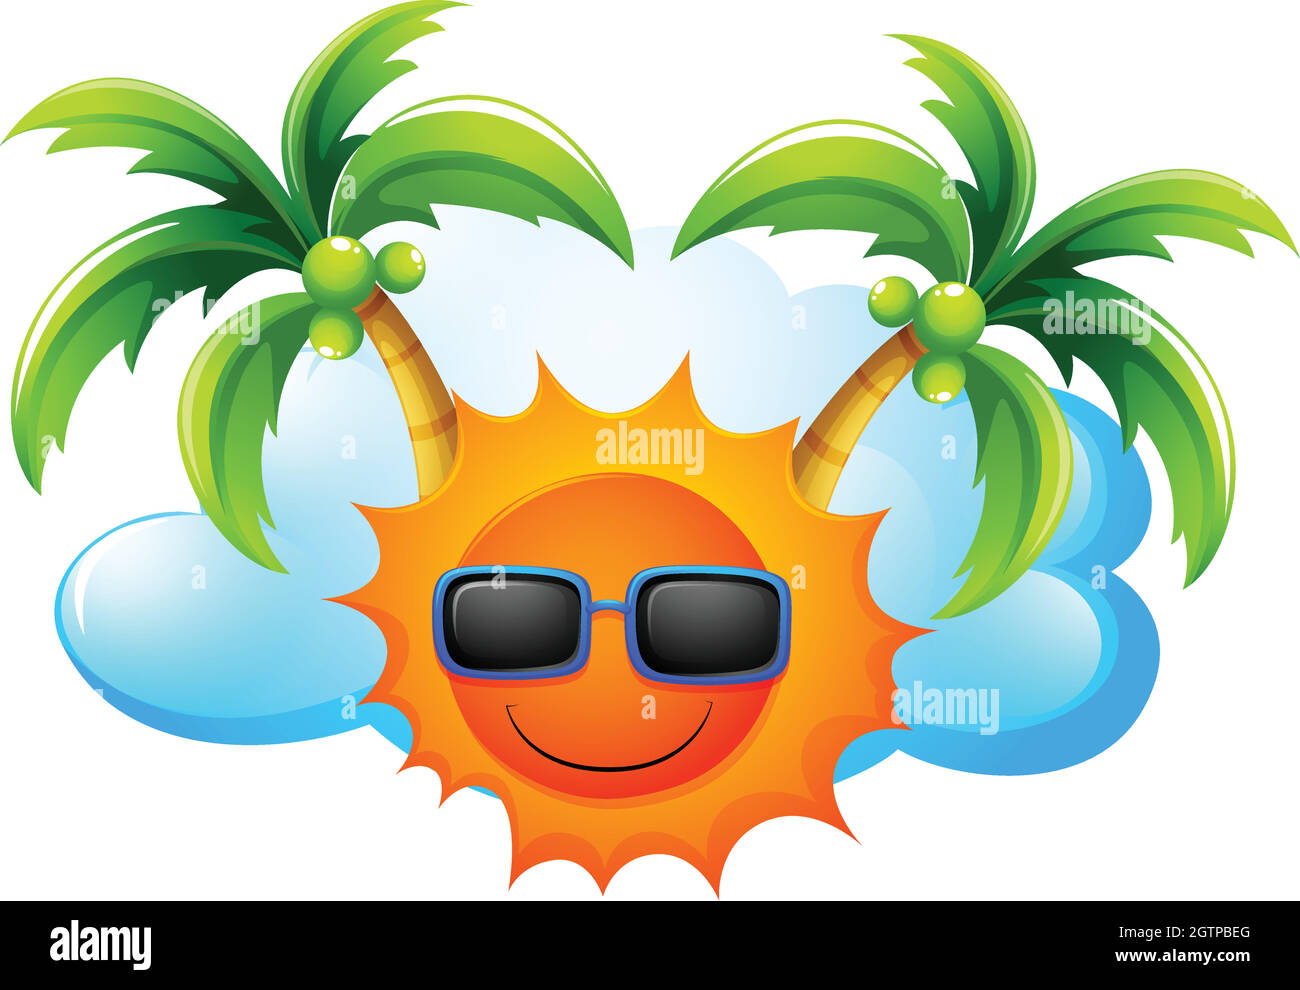 A sunny weather with coconut trees Stock Vector